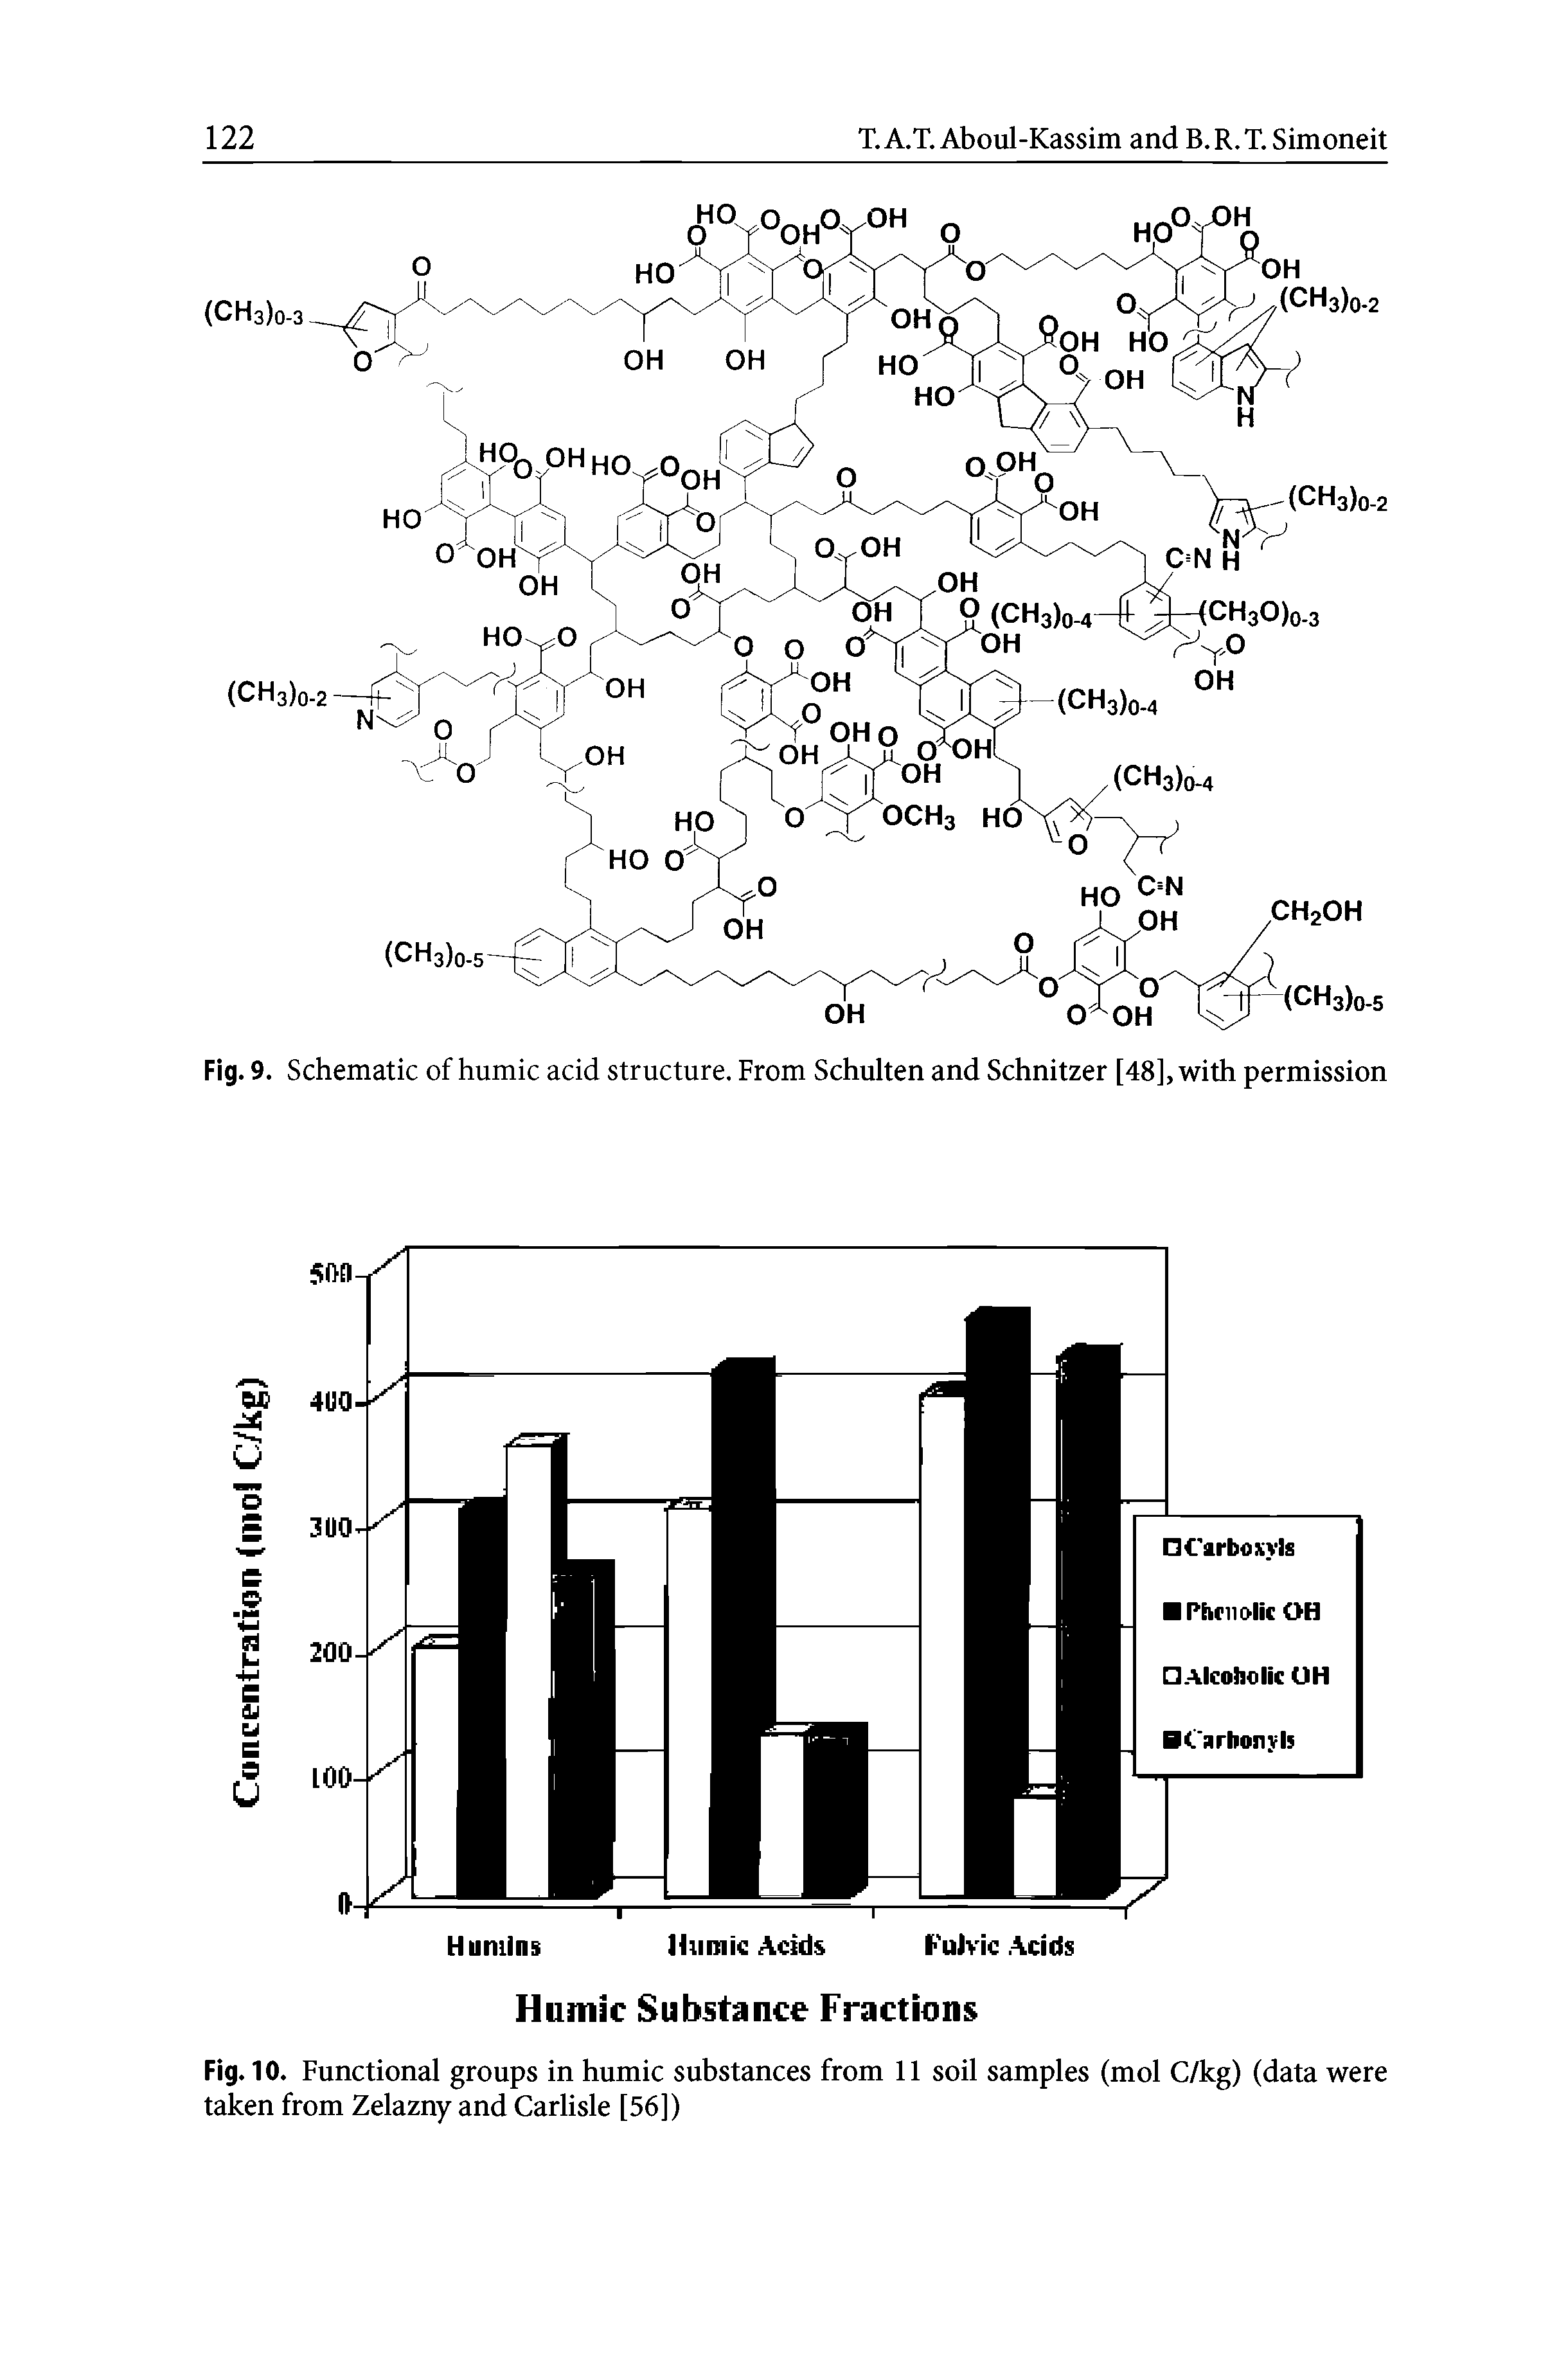 Fig. 10. Functional groups in humic substances from 11 soil samples (mol C/kg) (data were taken from Zelazny and Carlisle [56])...